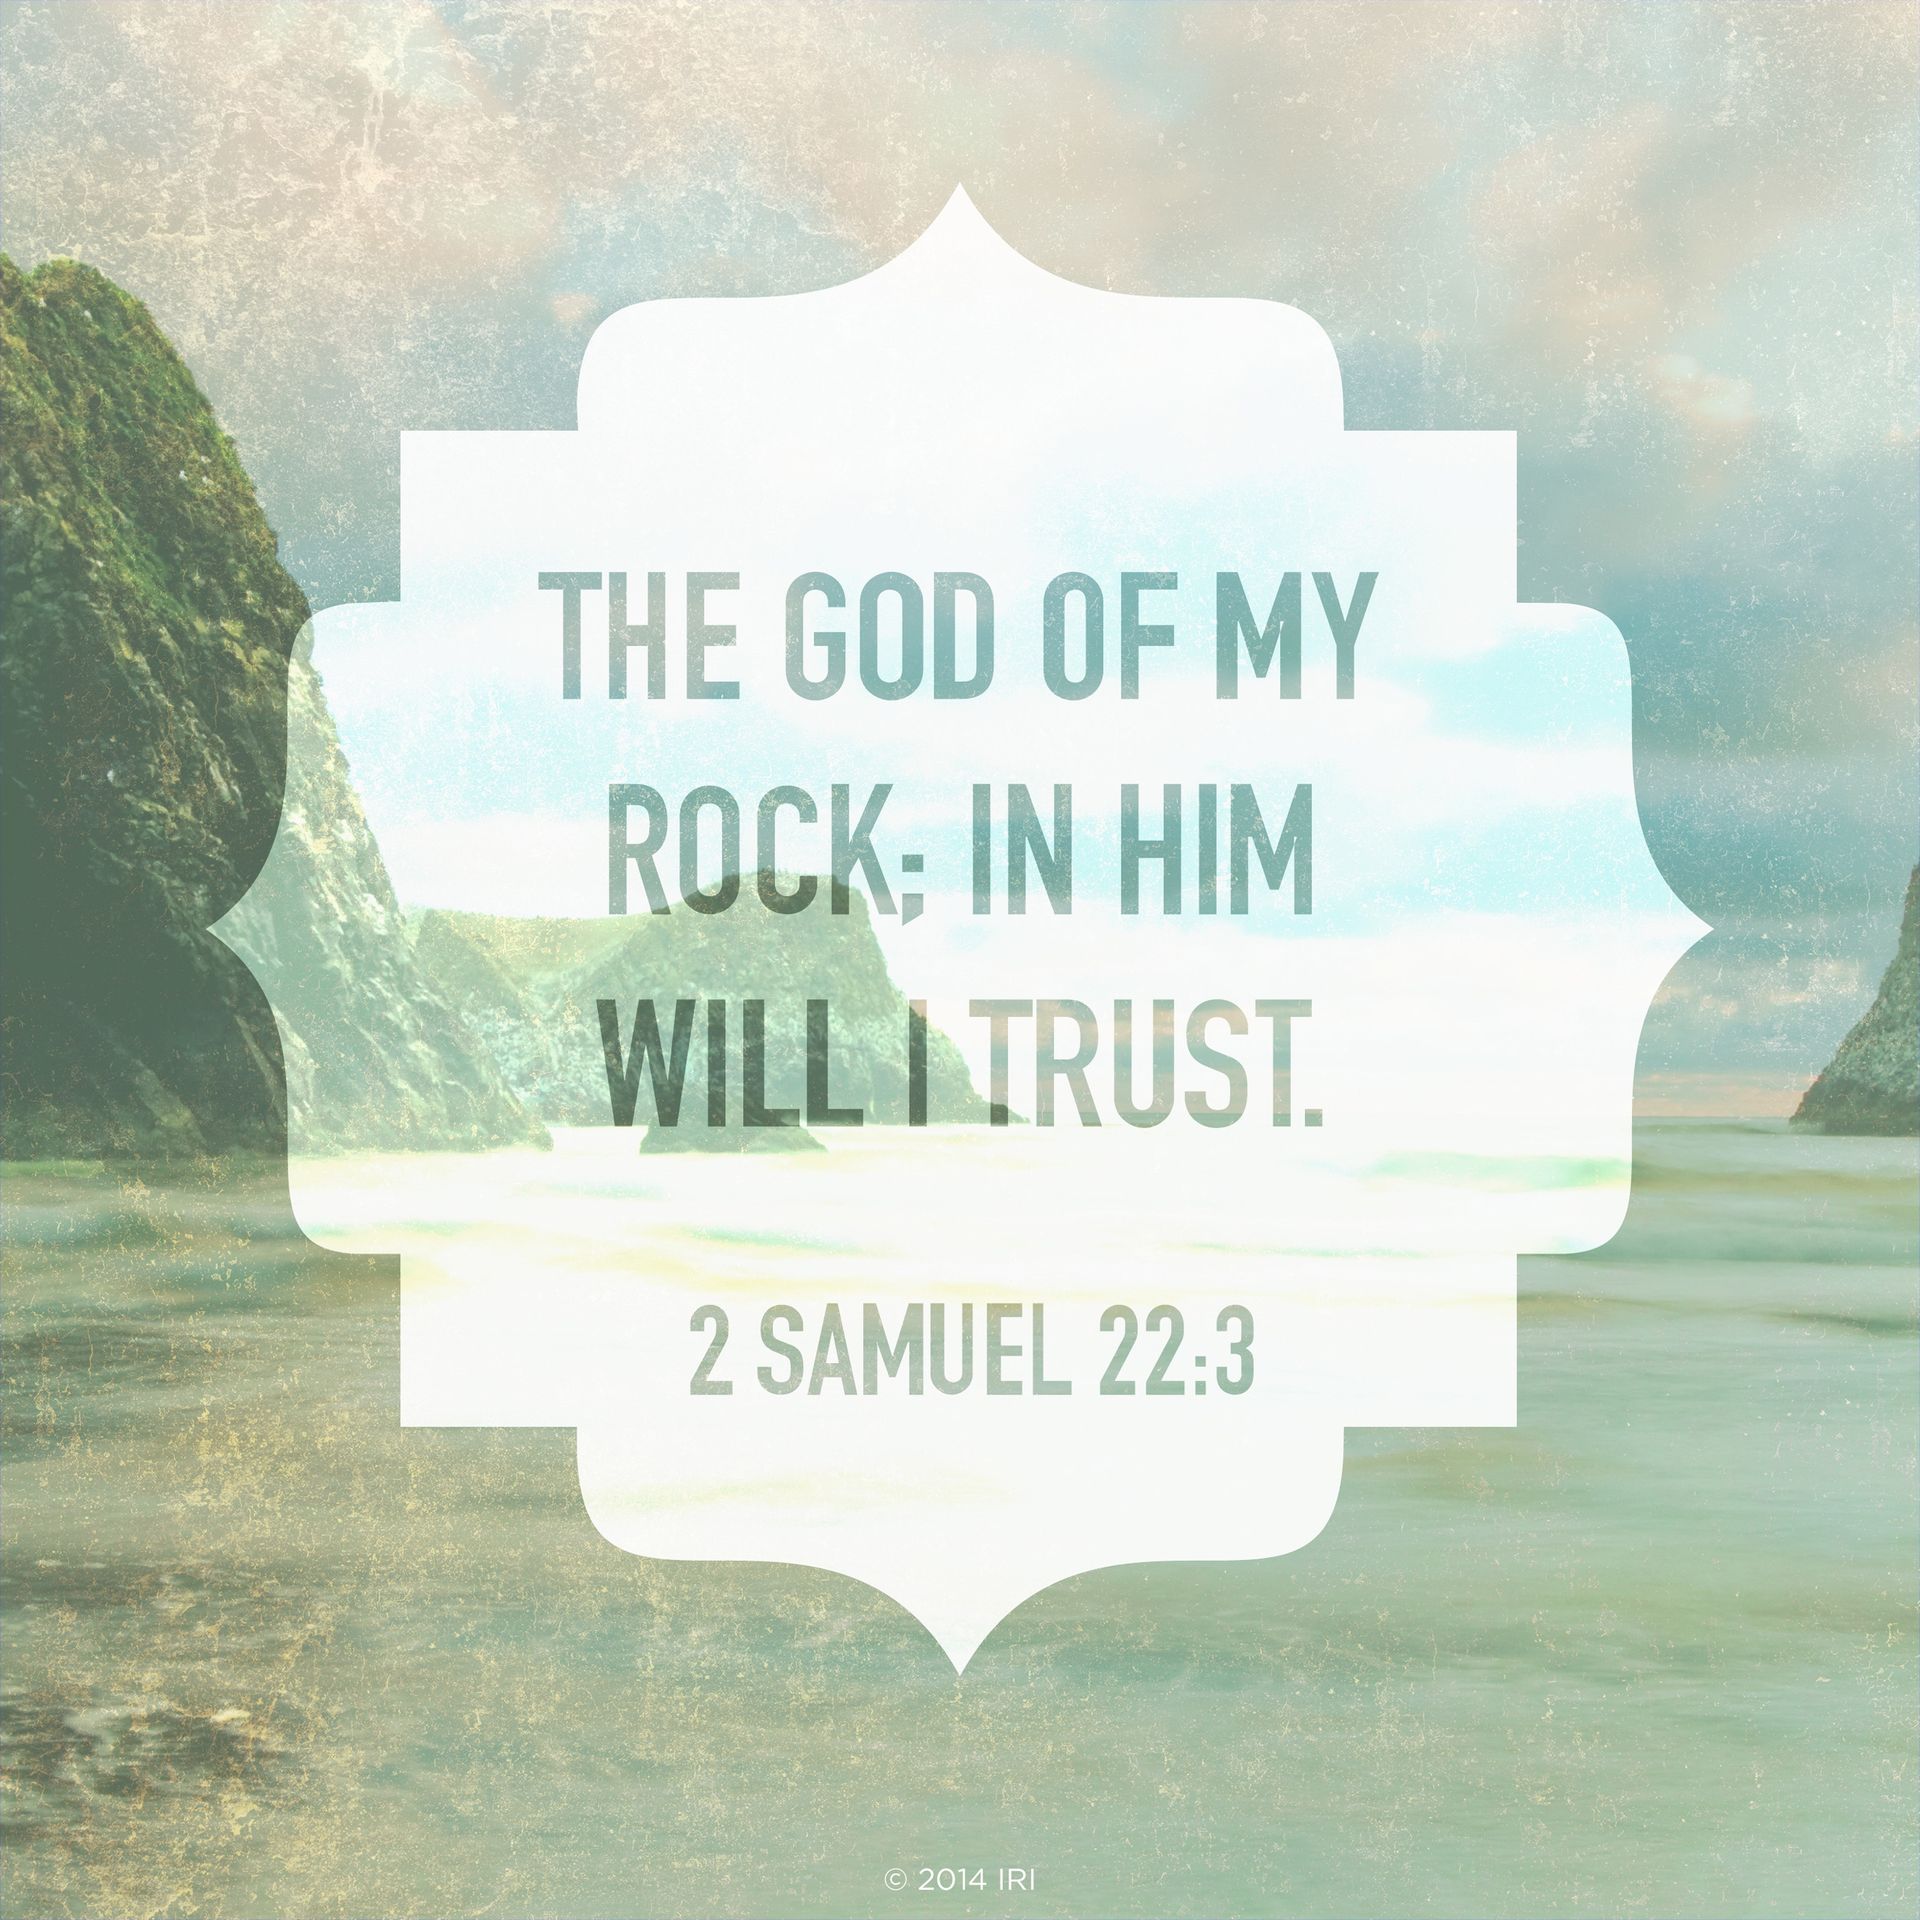 “The God of my rock; in him will I trust.”—2 Samuel 22:3